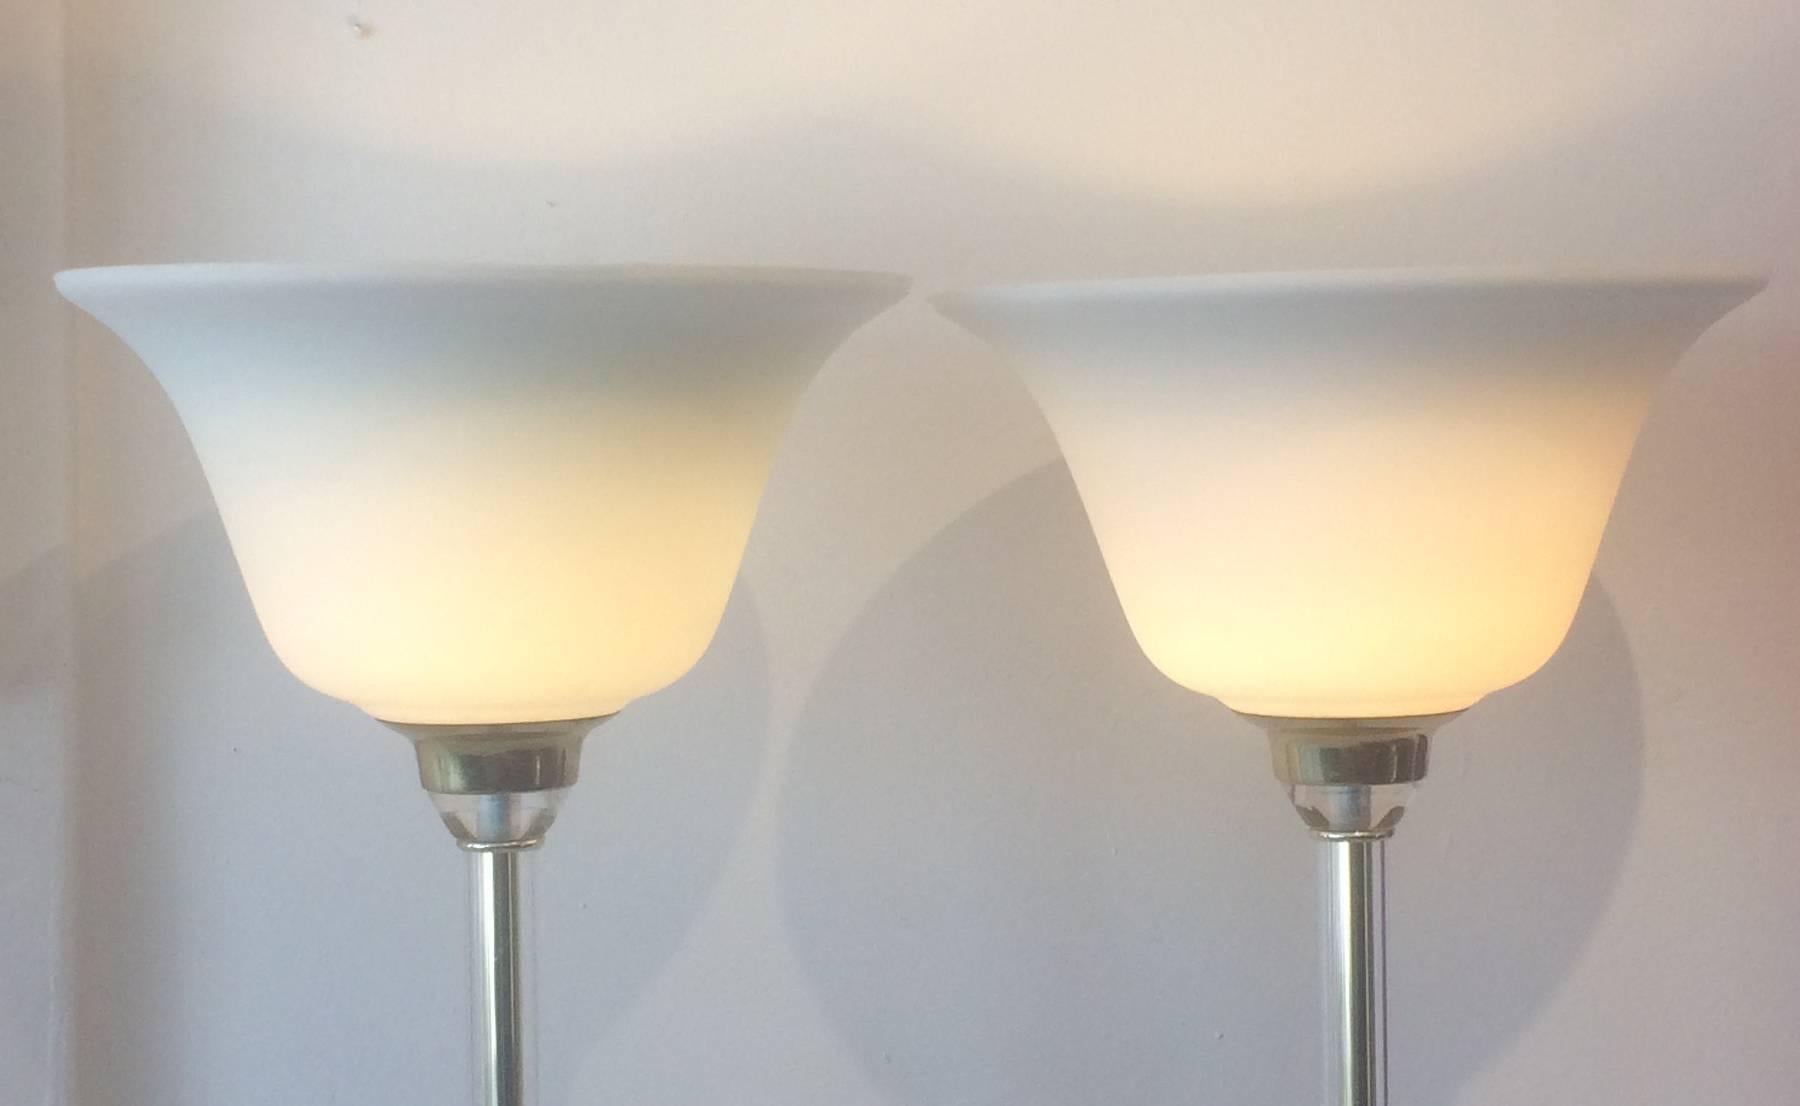 Pair of vintage floor lamps Lucite with white glass shades. Biomorphic Lucite basses with Lucite fitters and shaft, circa 1980s from a Miami Beach estate.